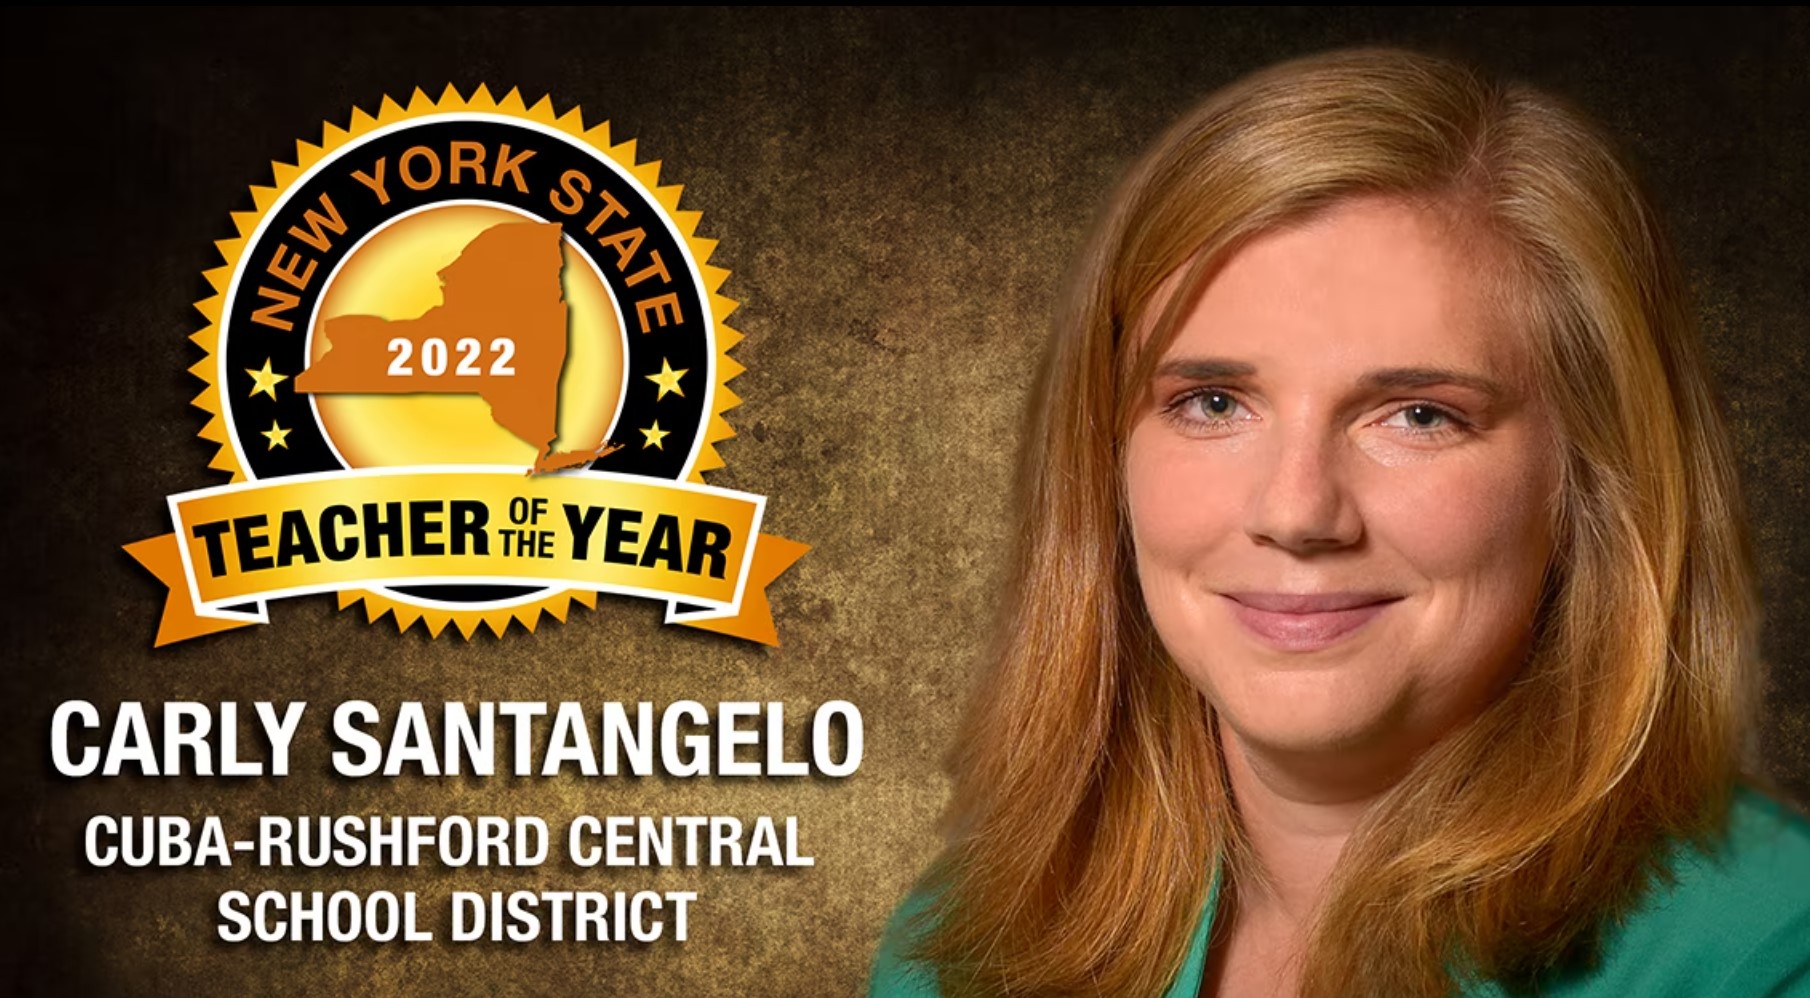 Image of Carly Santangelo, the 2022 New York State Teacher of the Year